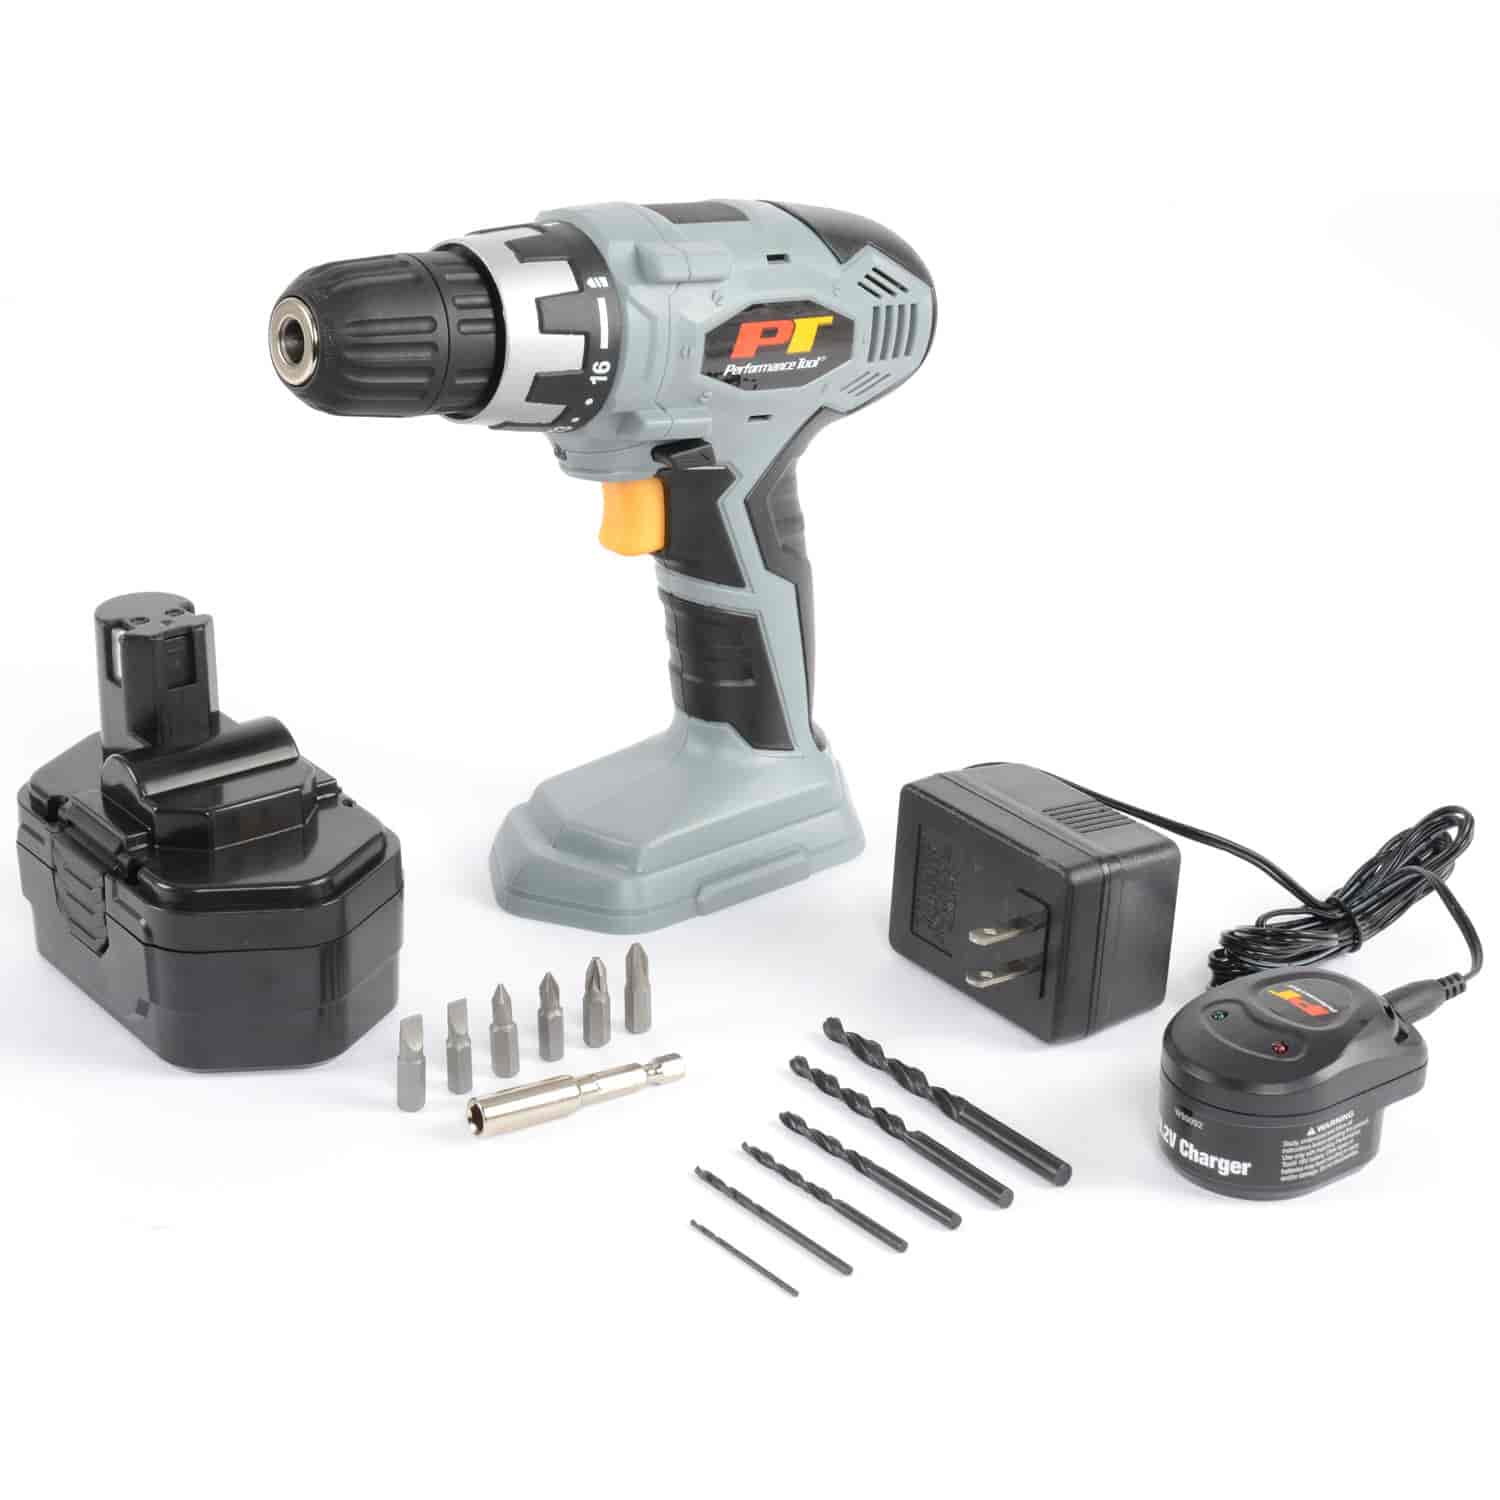 19.2-Volt Cordless Drill with 13-Piece Bit Set [3/8 in. Chuck]